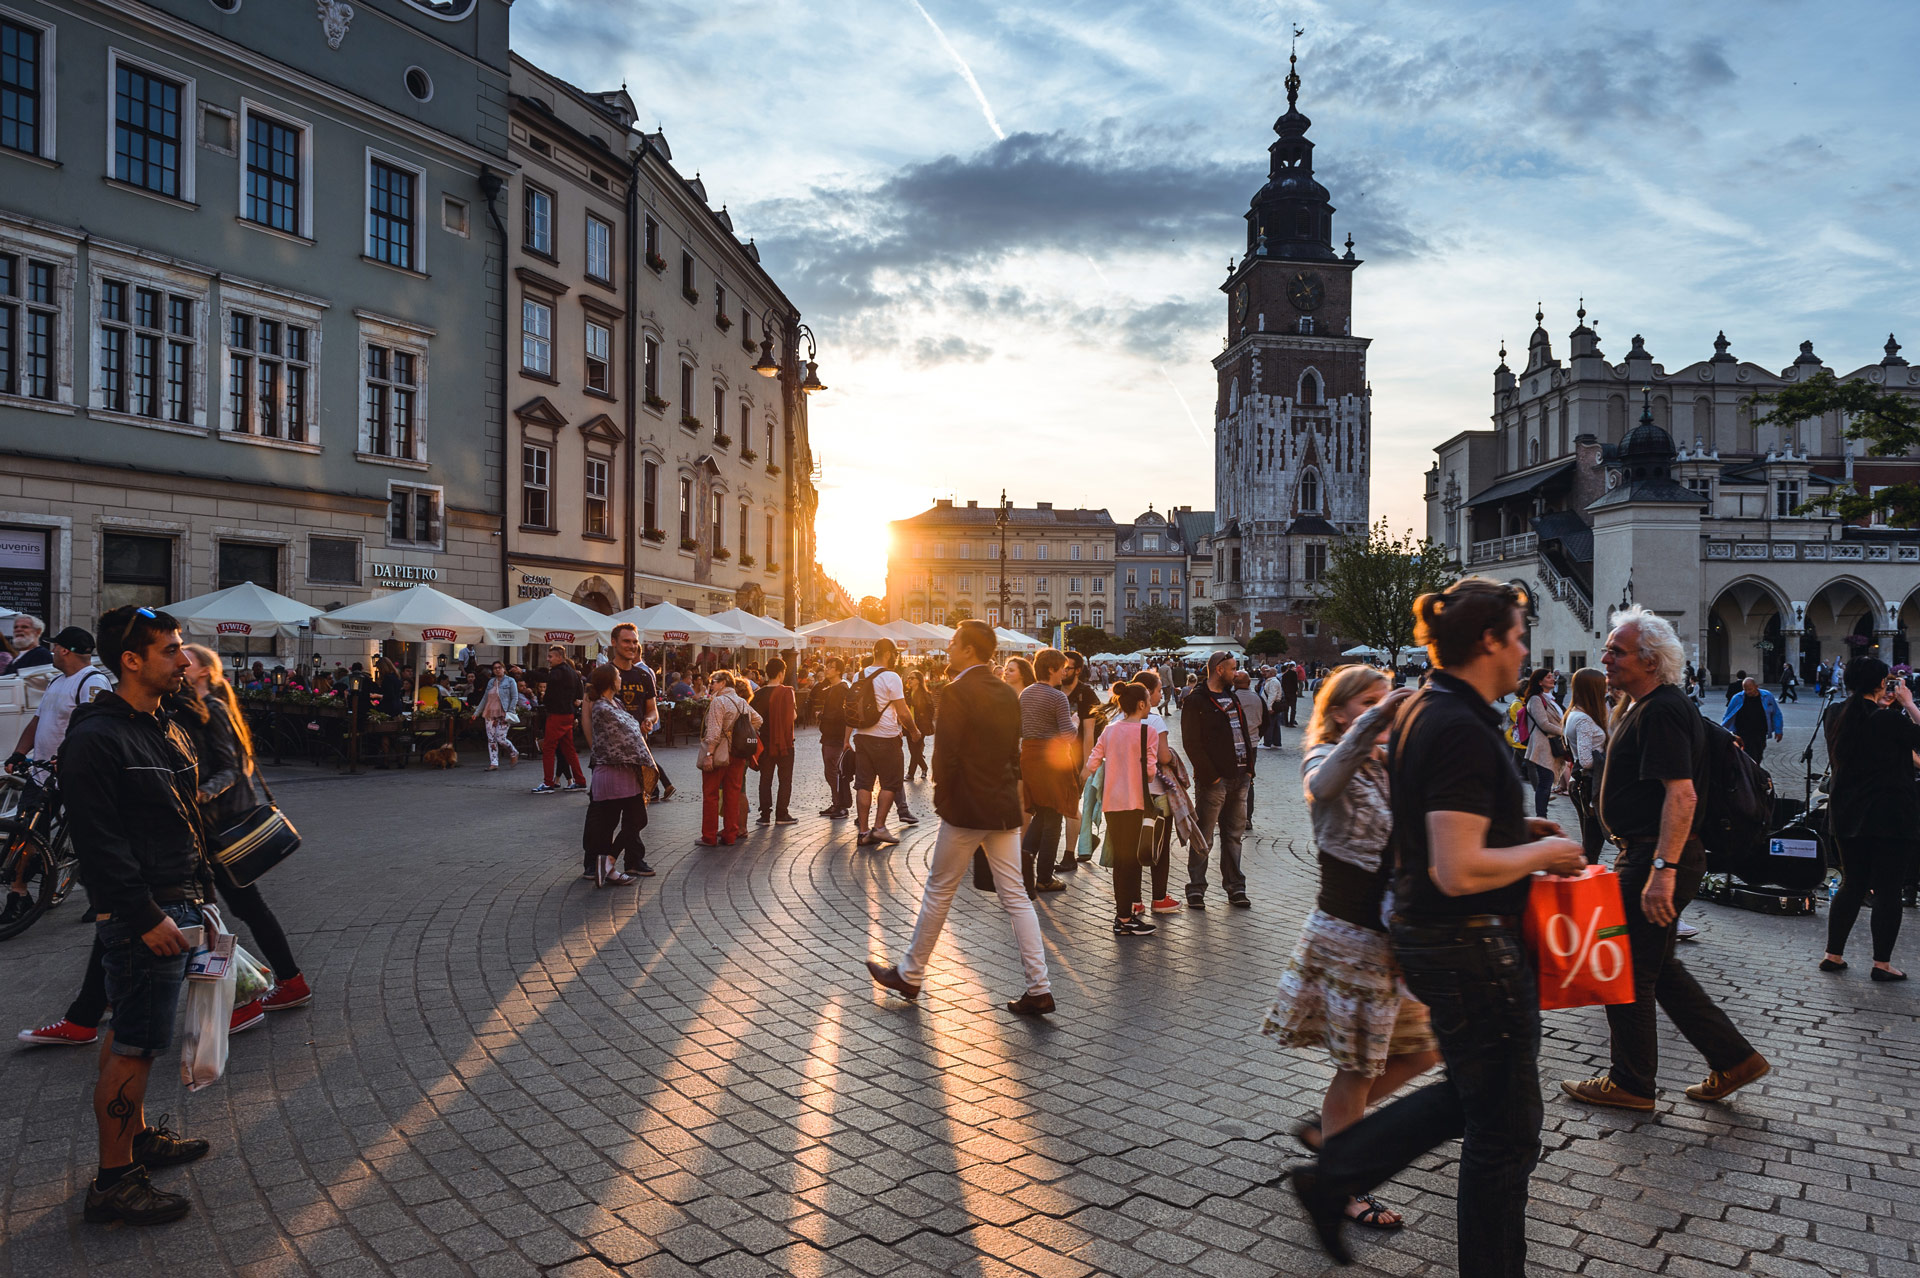 Traveling Poland on a Budget in Krakow